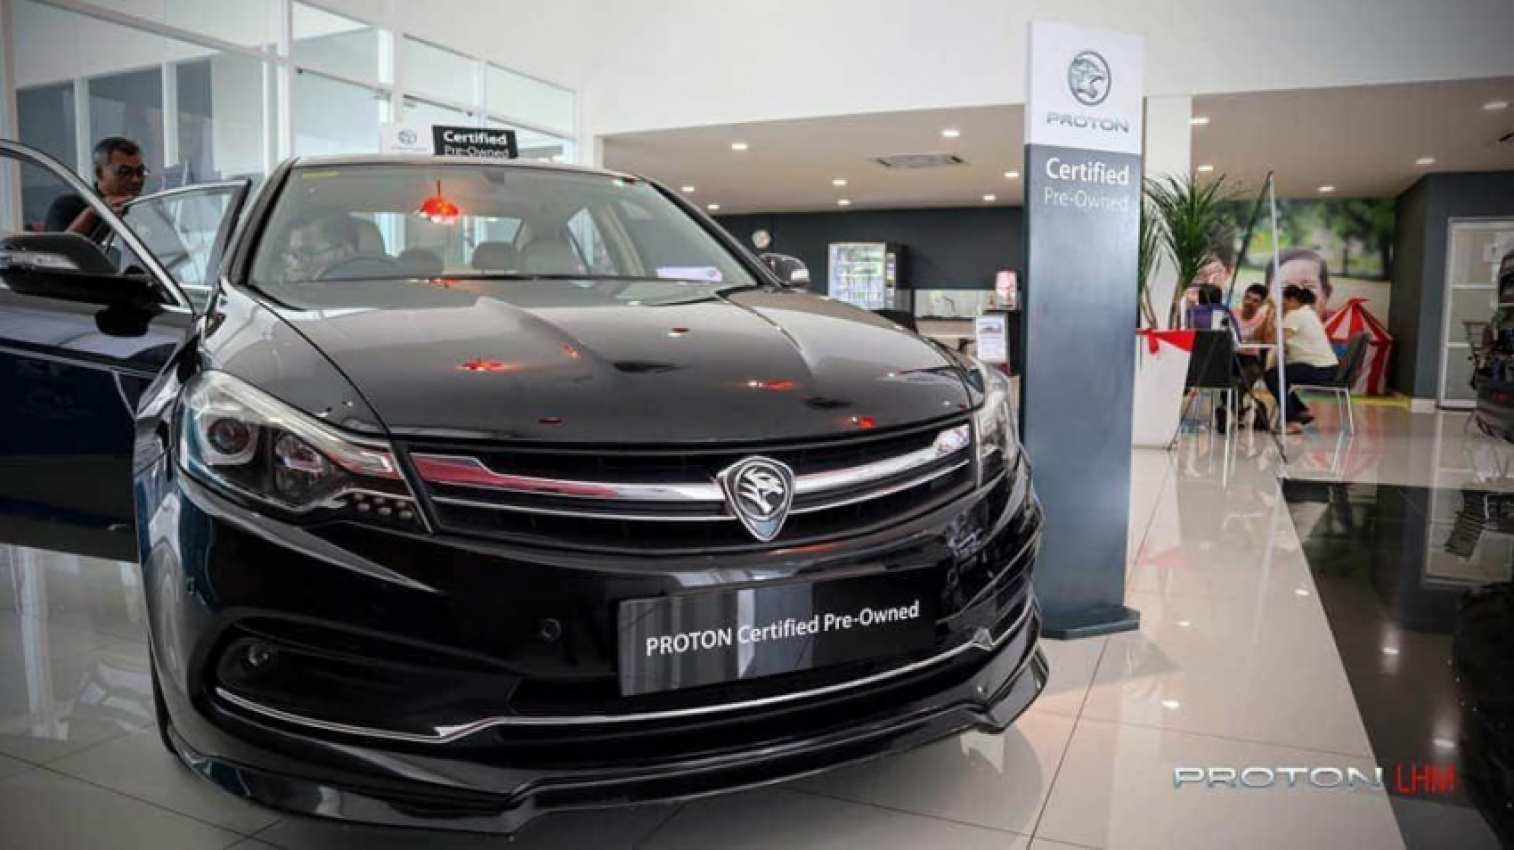 autos, cars, ram, reviews, insights, pre-owned, proton, proton certified pre-owned, proton pcpo, proton trade-in, proton ucm, used car, a deep dive into the proton certified pre-owned (pcpo) vehicle program